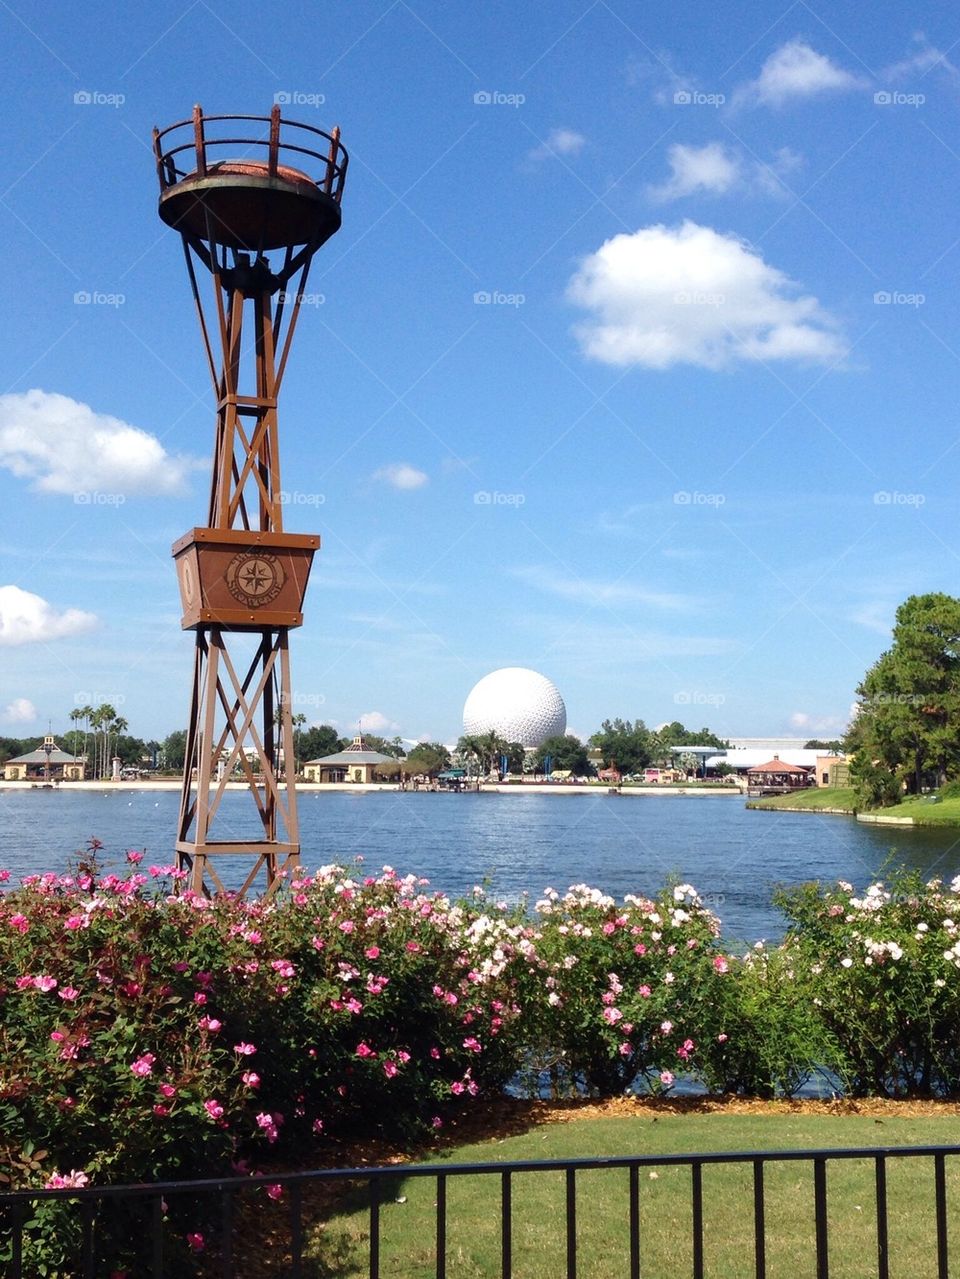 Epcot. Food and wine.